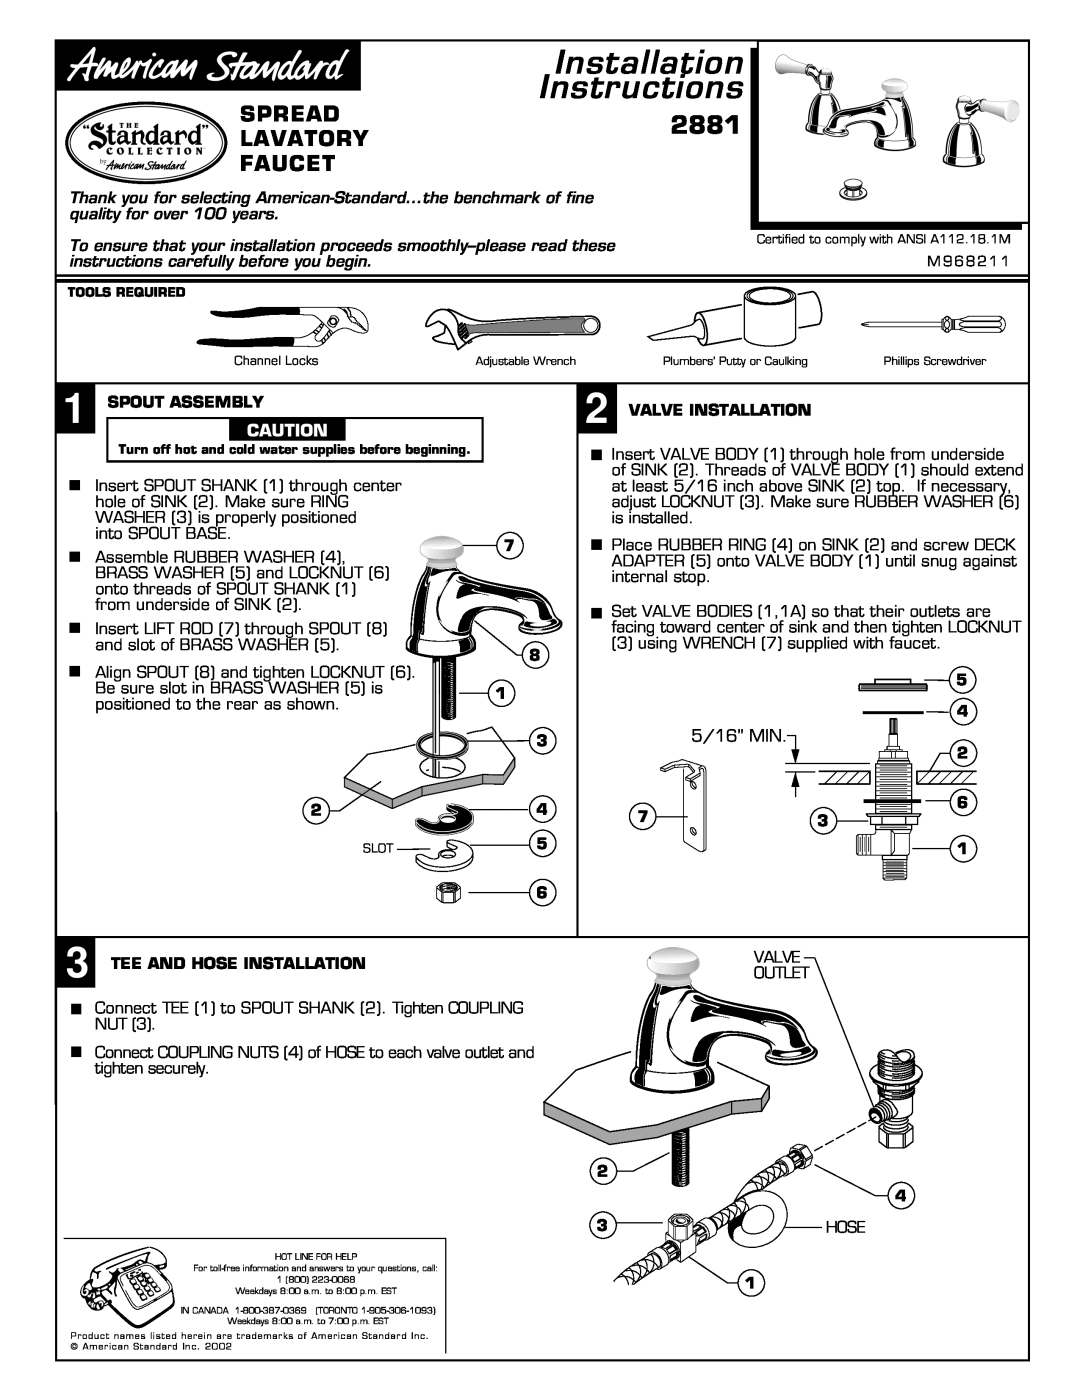 American Standard 2881 installation instructions Installation Instructions, Spread, Lavatory, Faucet, Spout Assembly 